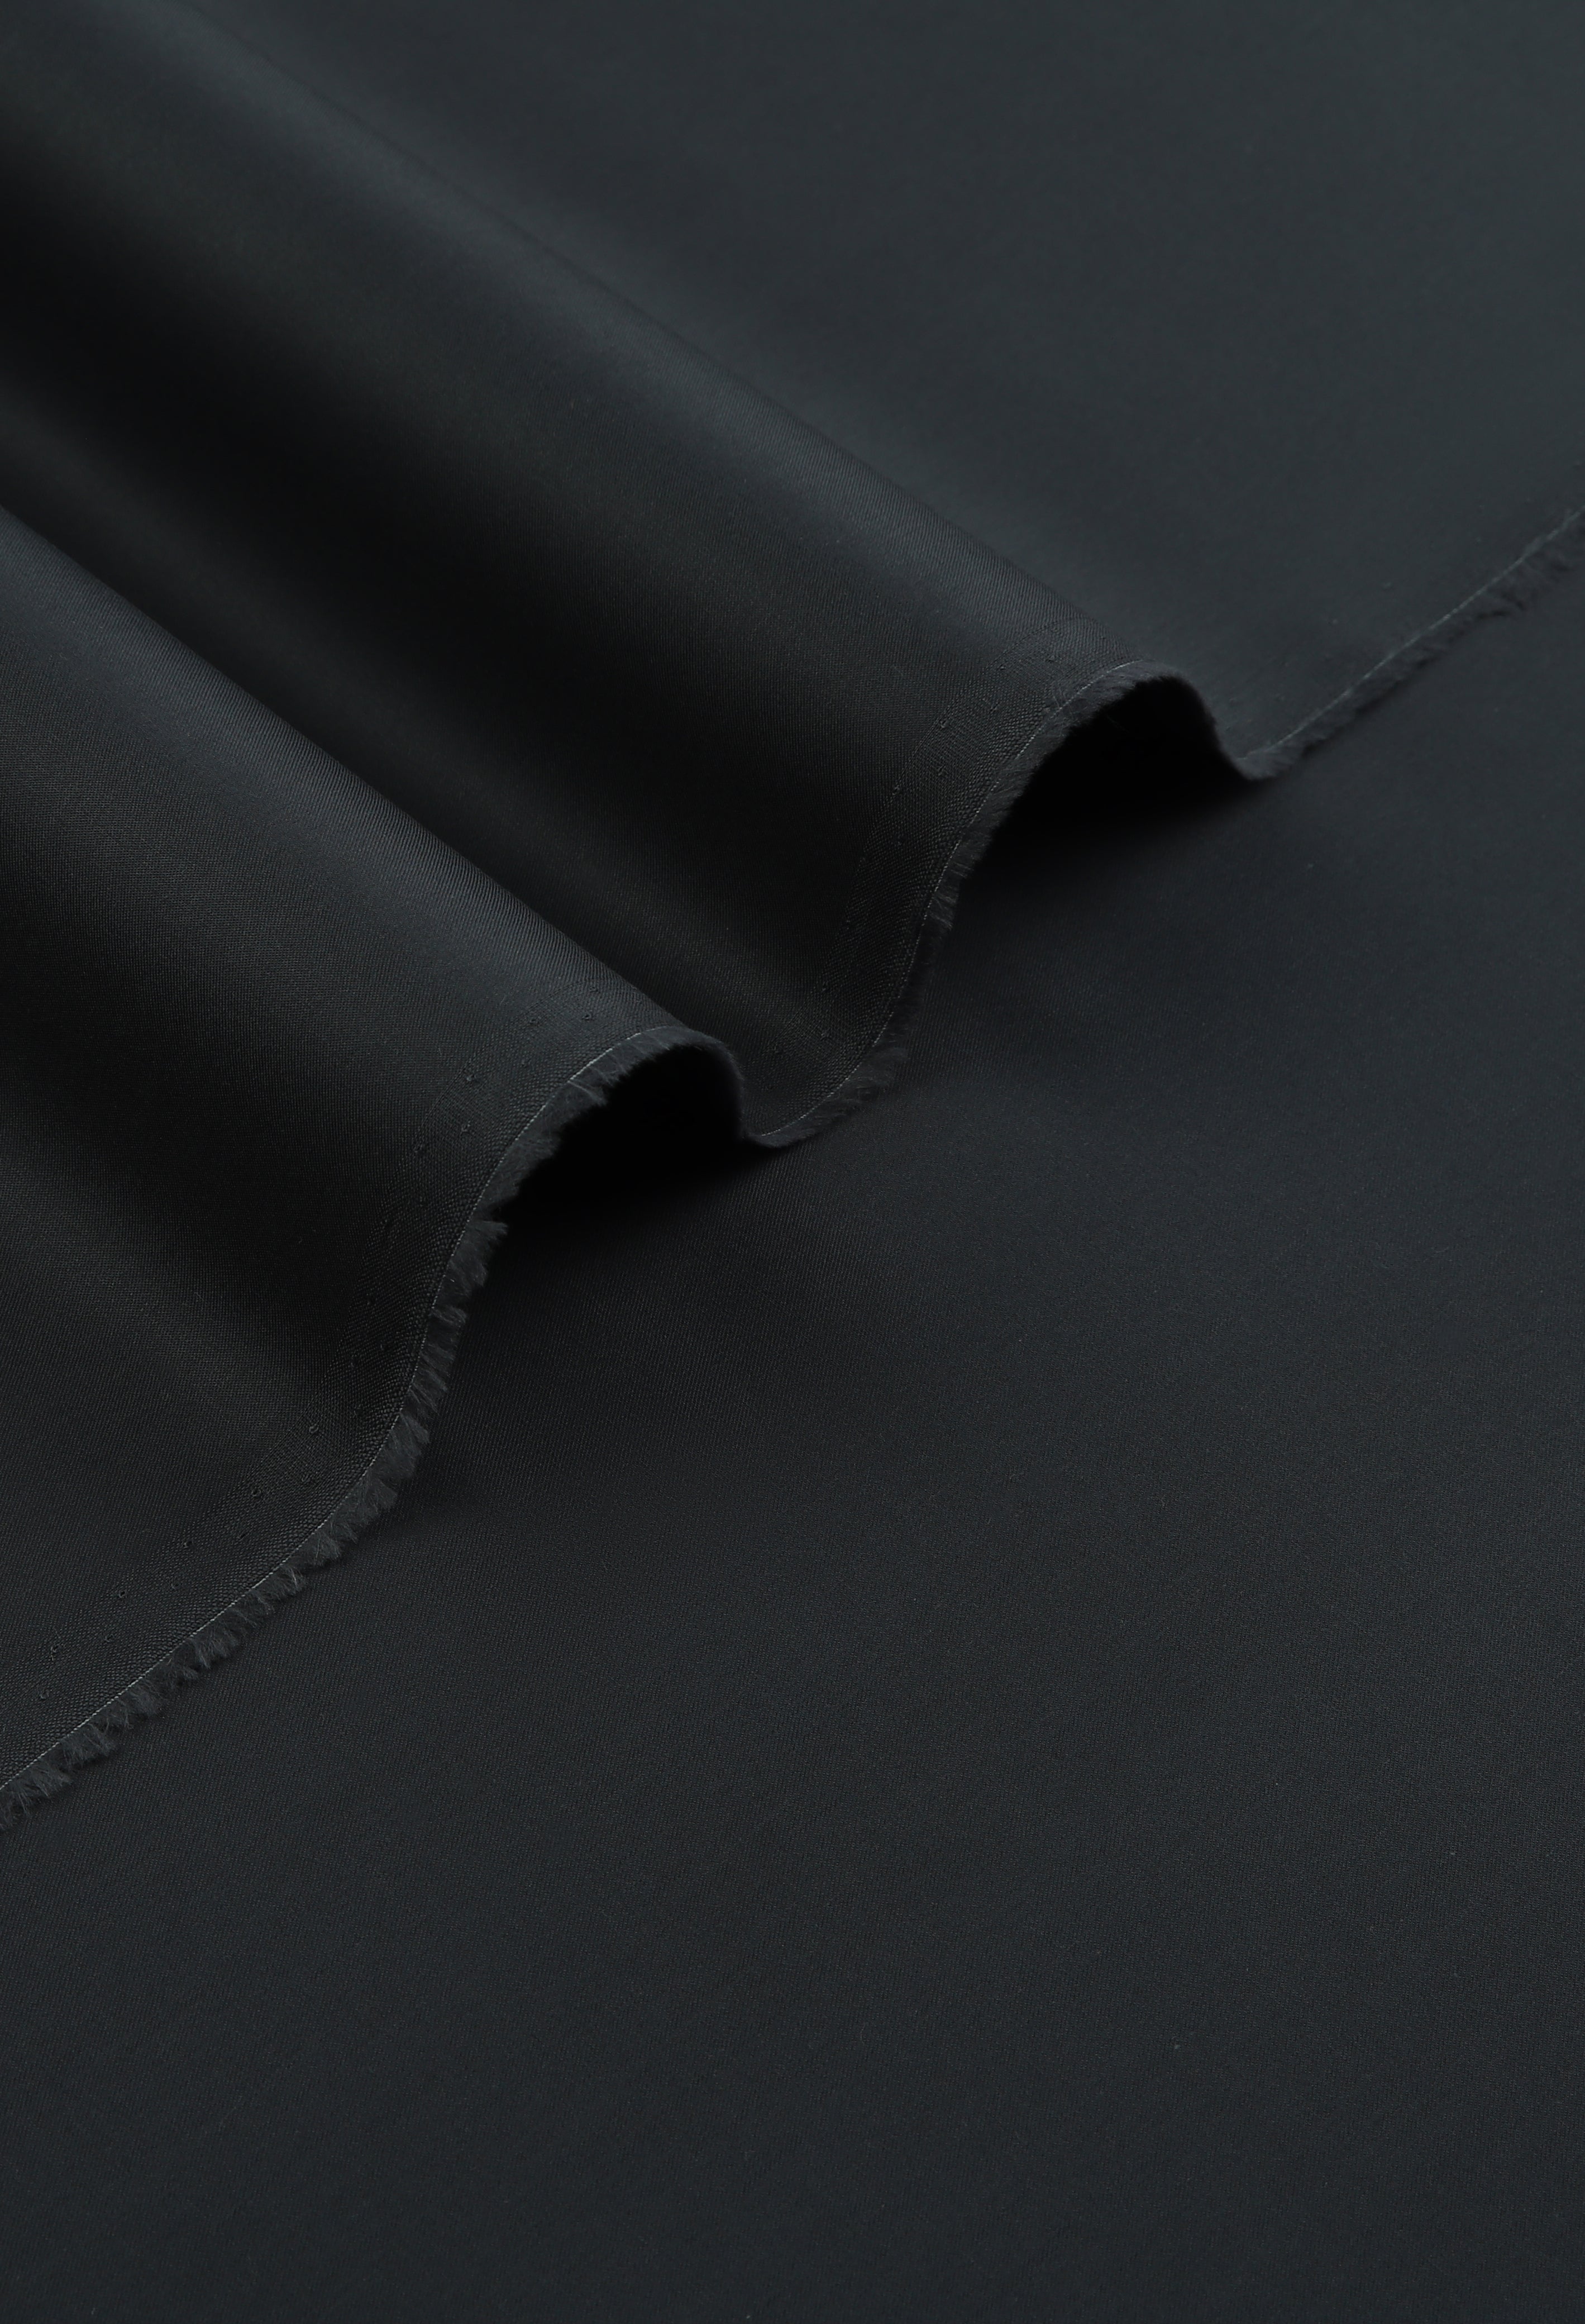 Charcoal Grey Cotton Fabric